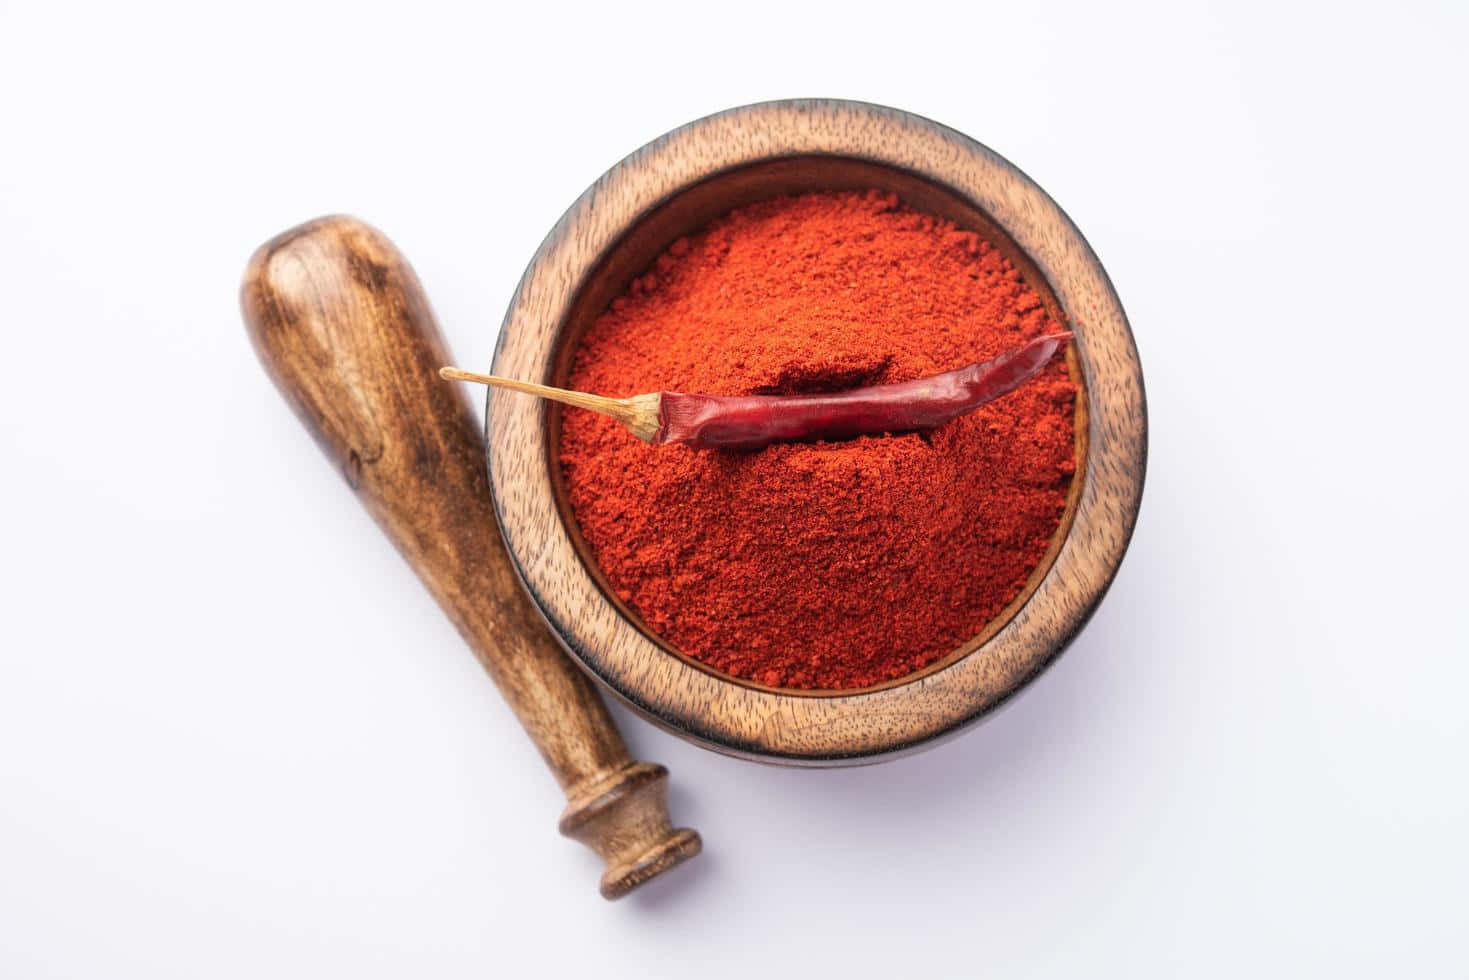 Vibrant Red Chili Powder displayed on a wooden surface Wallpaper